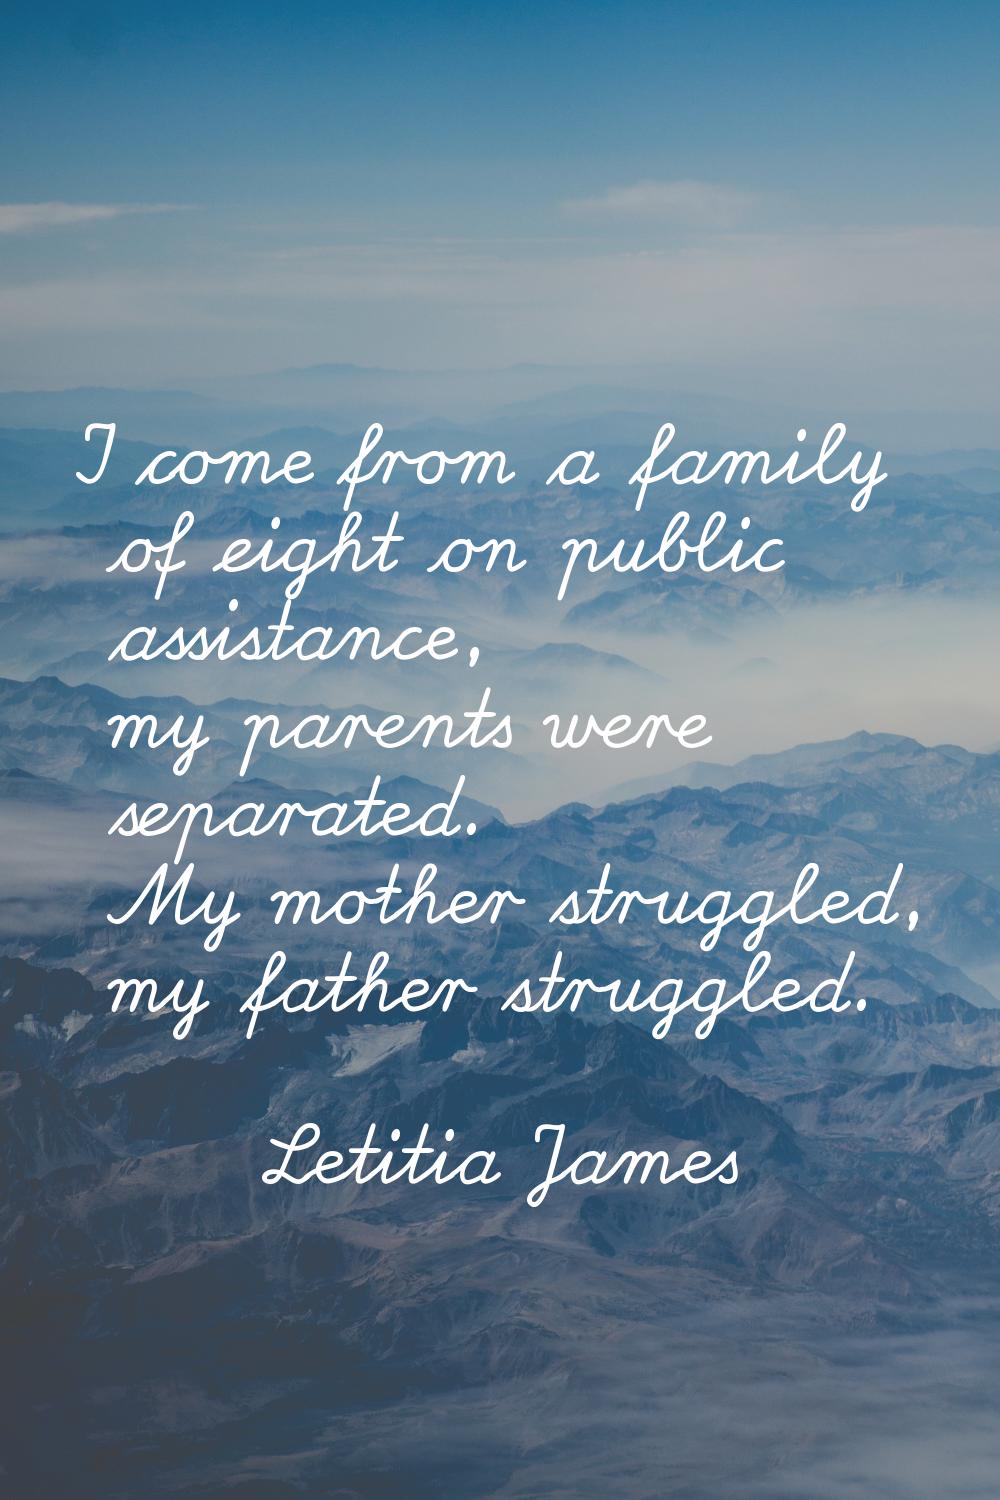 I come from a family of eight on public assistance, my parents were separated. My mother struggled,